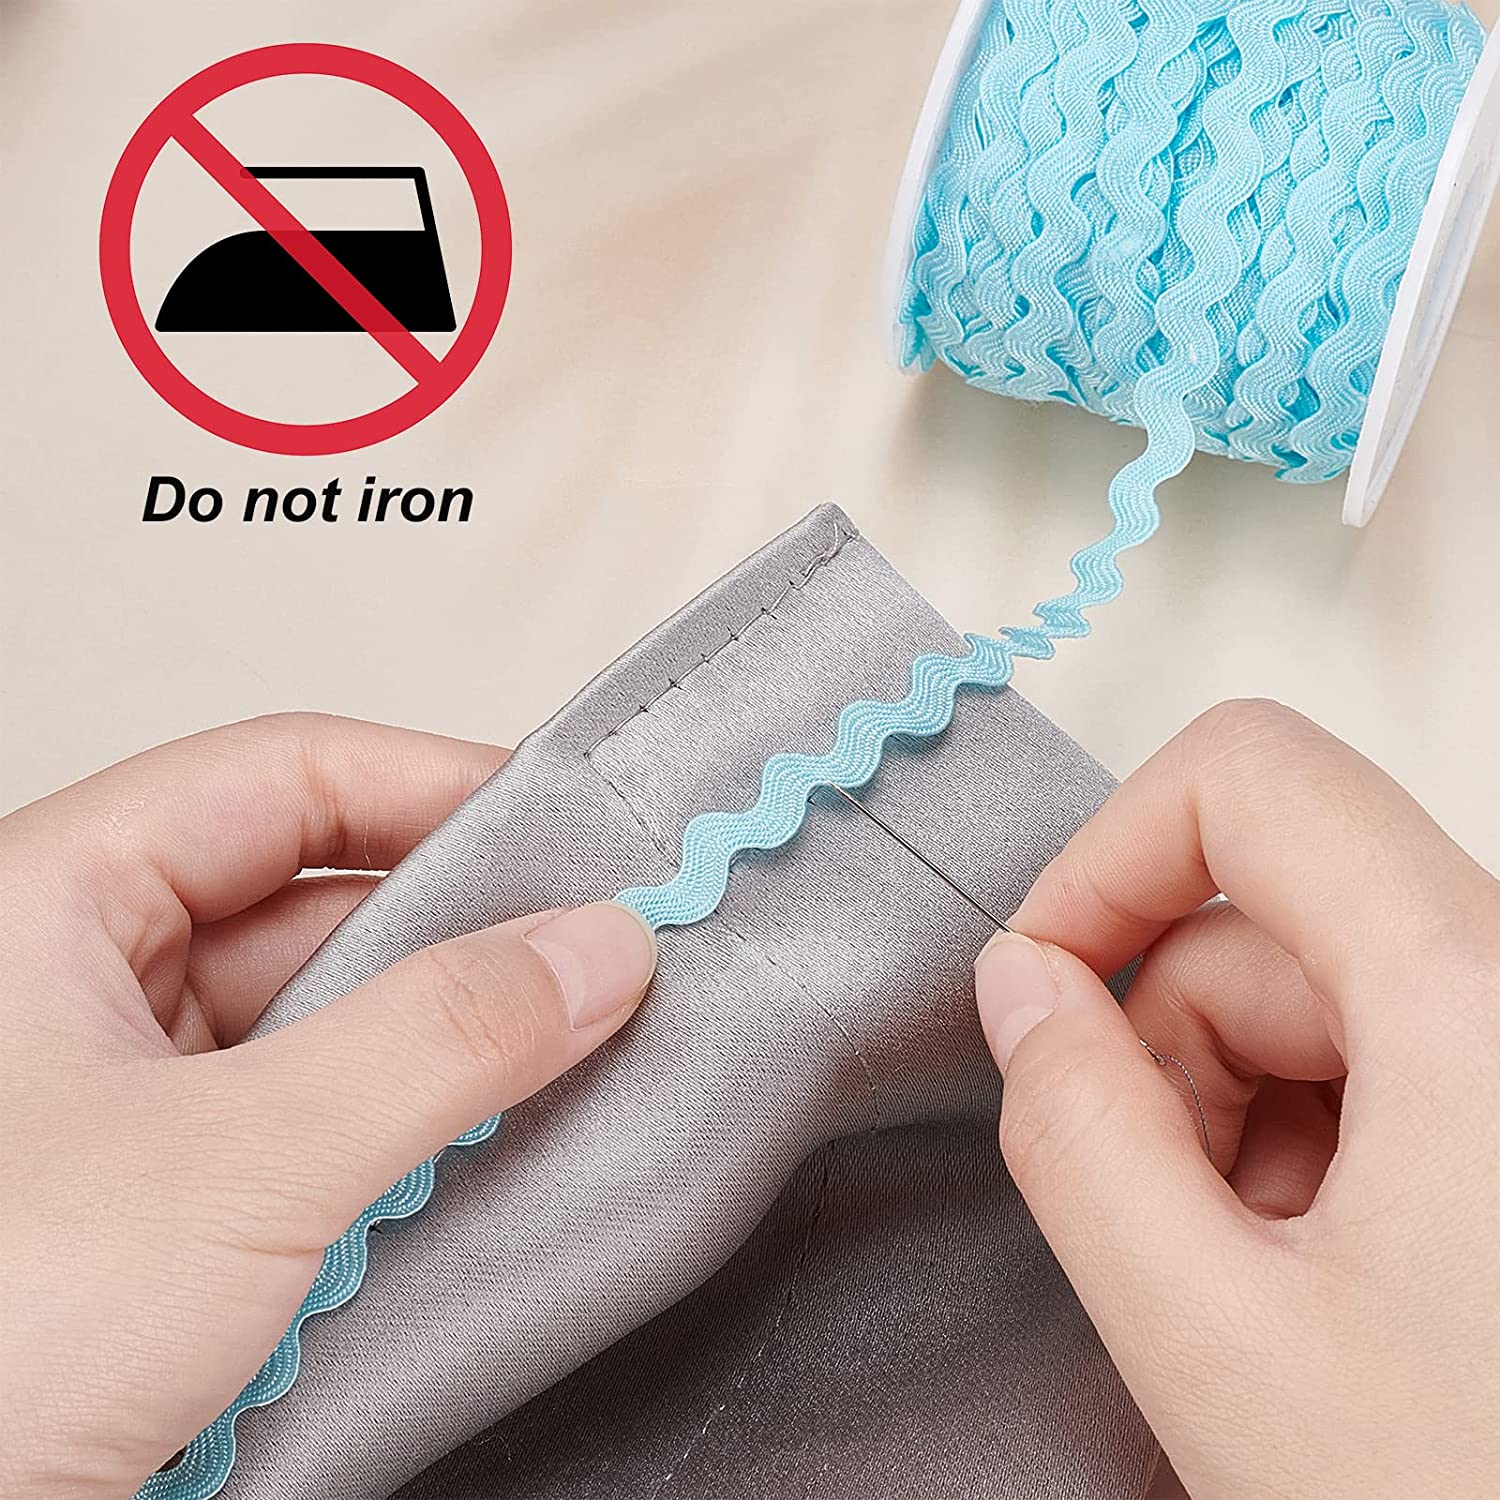 CRASPIRE 1 Roll 27yd/25m RIC Rac Trim Ribbon Wave Sewing Bending Fringe  Trim 5mm/0.2 inch for Sewing Flower Making Wedding Party Lace Ribbon Craft  (Light Blue)